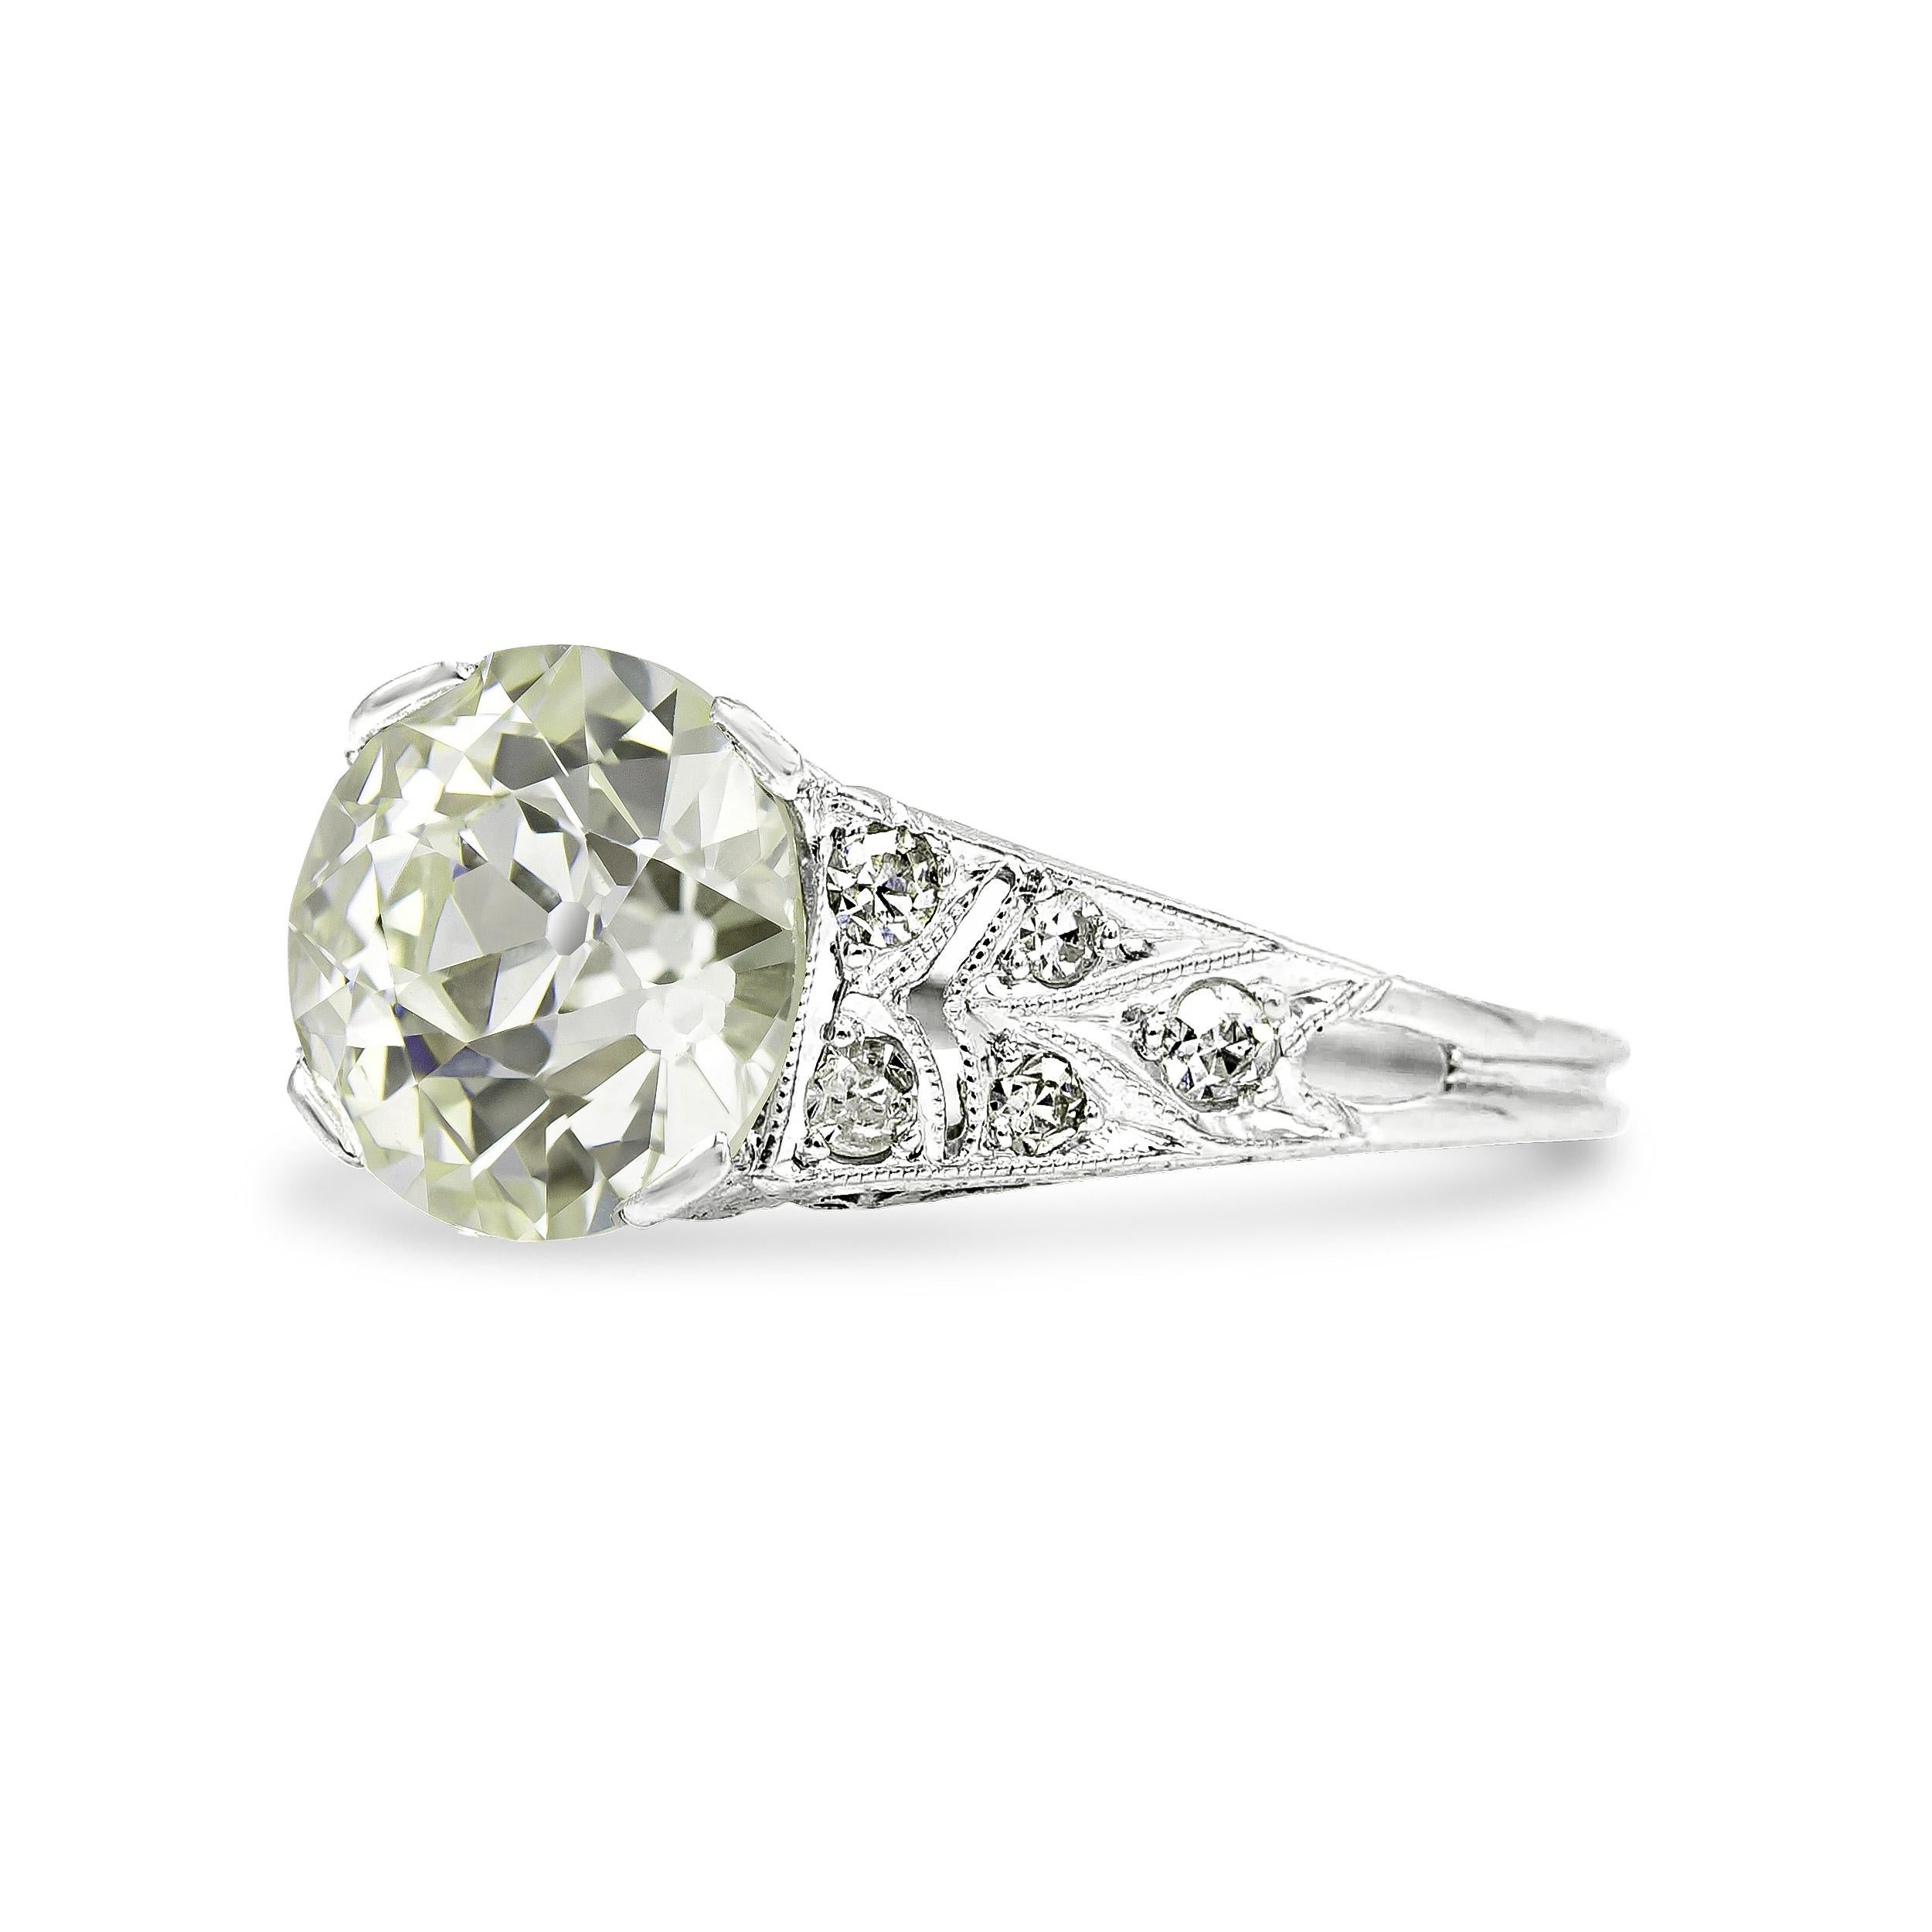 Charmed, we’re sure. That’s certainly how you’ll feel when you slip this Art Deco engagement ring onto your finger. Hand-crafted with openwork design, her elegance is a true example of old world artisanship and style. Centered in her crown is a 2.49